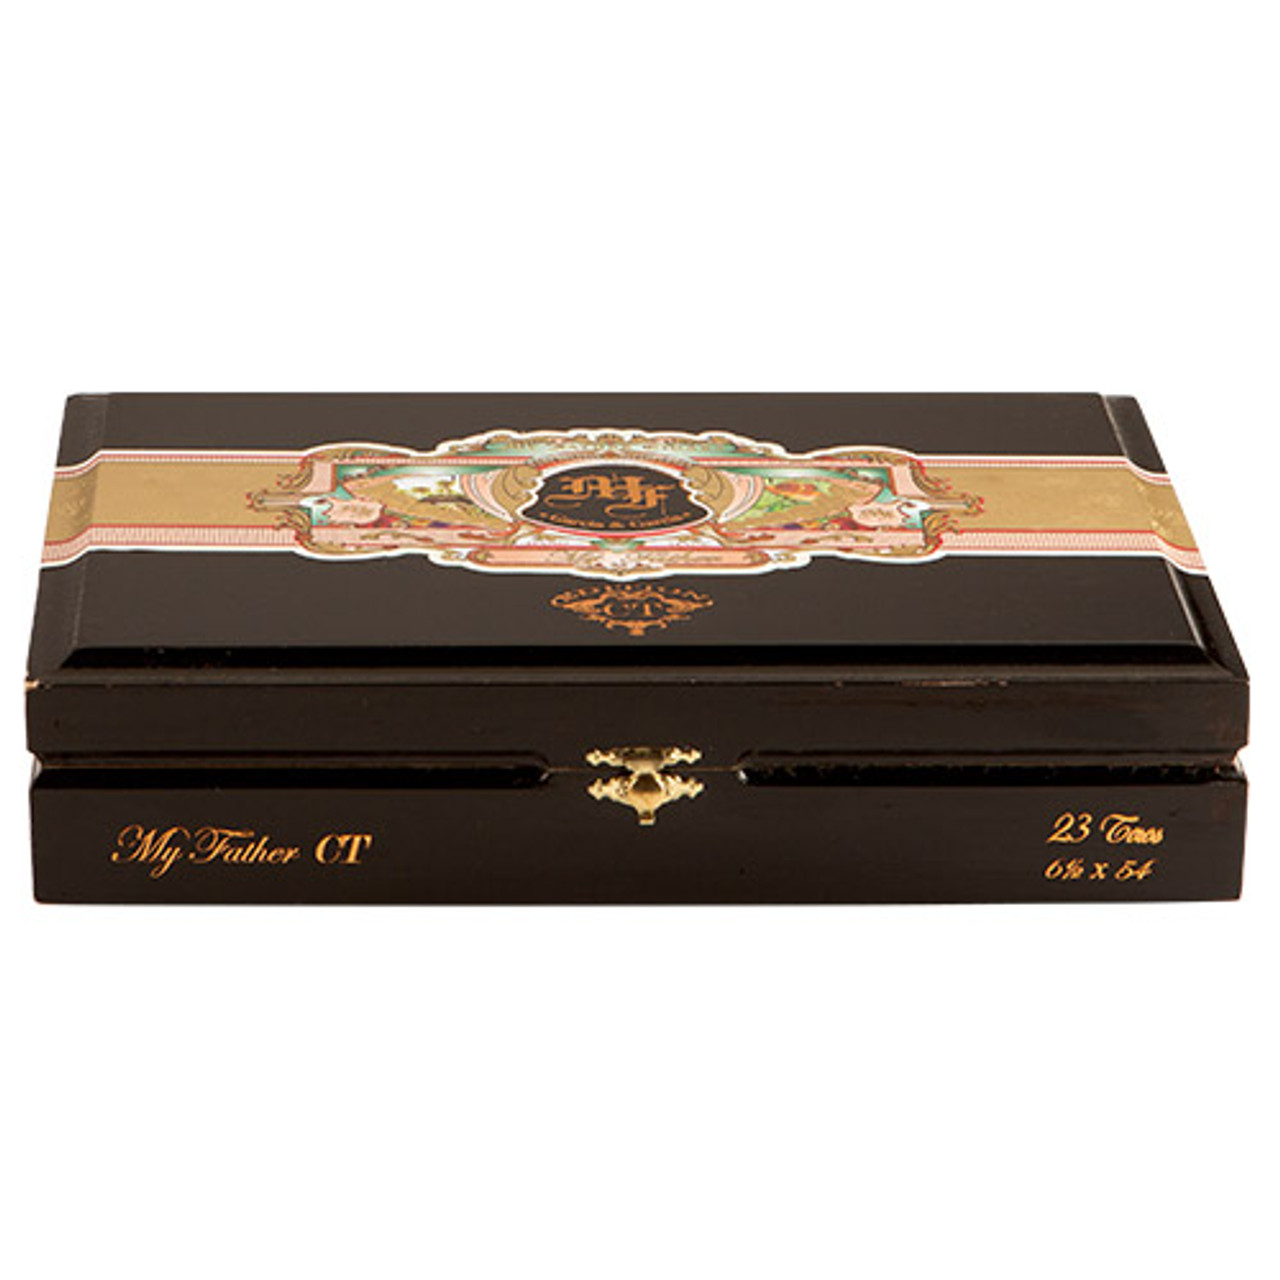 My Father Connecticut Robusto Cigars - 5.25 x 52 (Box of 23) *Box